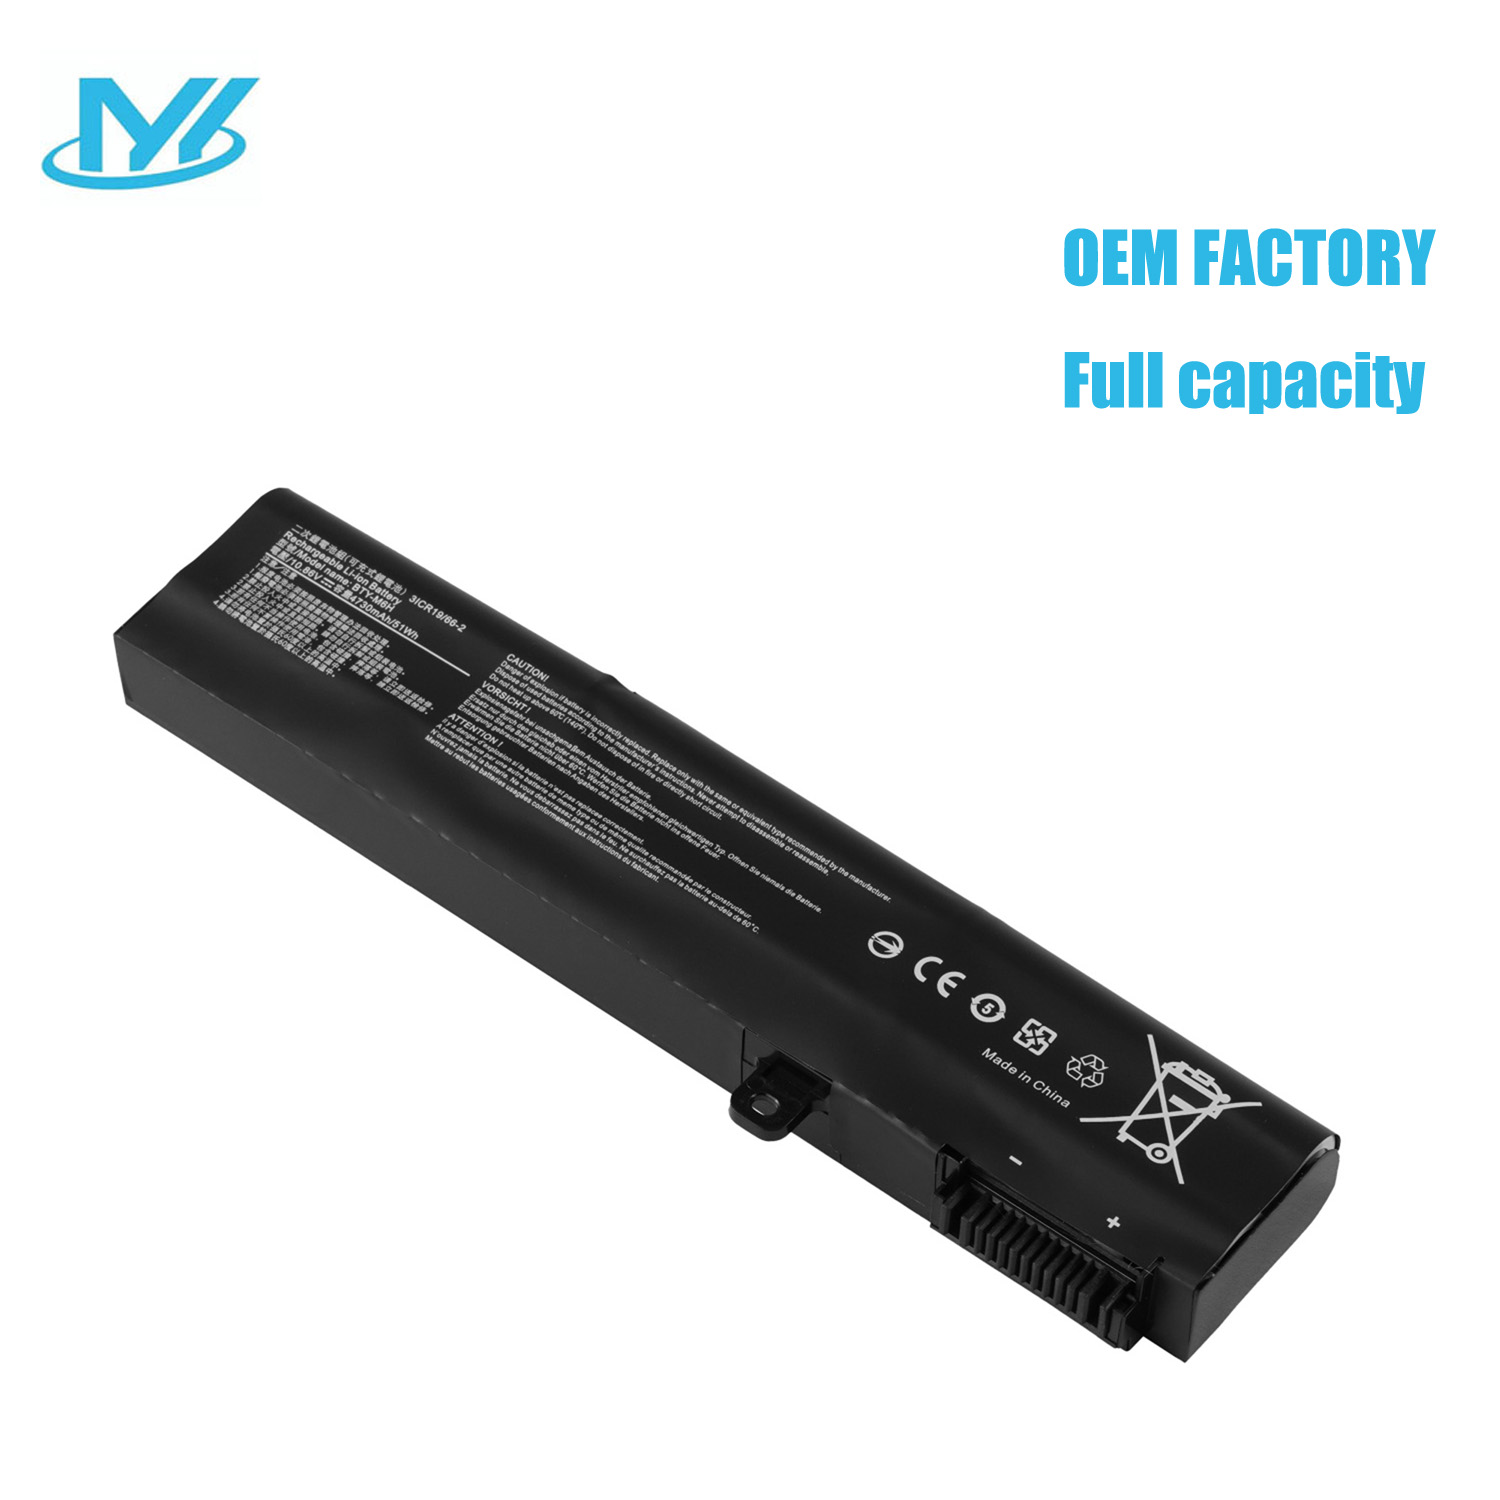 BTY-M6H rechargeable lithium ion Notebook battery Laptop battery10.86V 51Wh 4730mAh